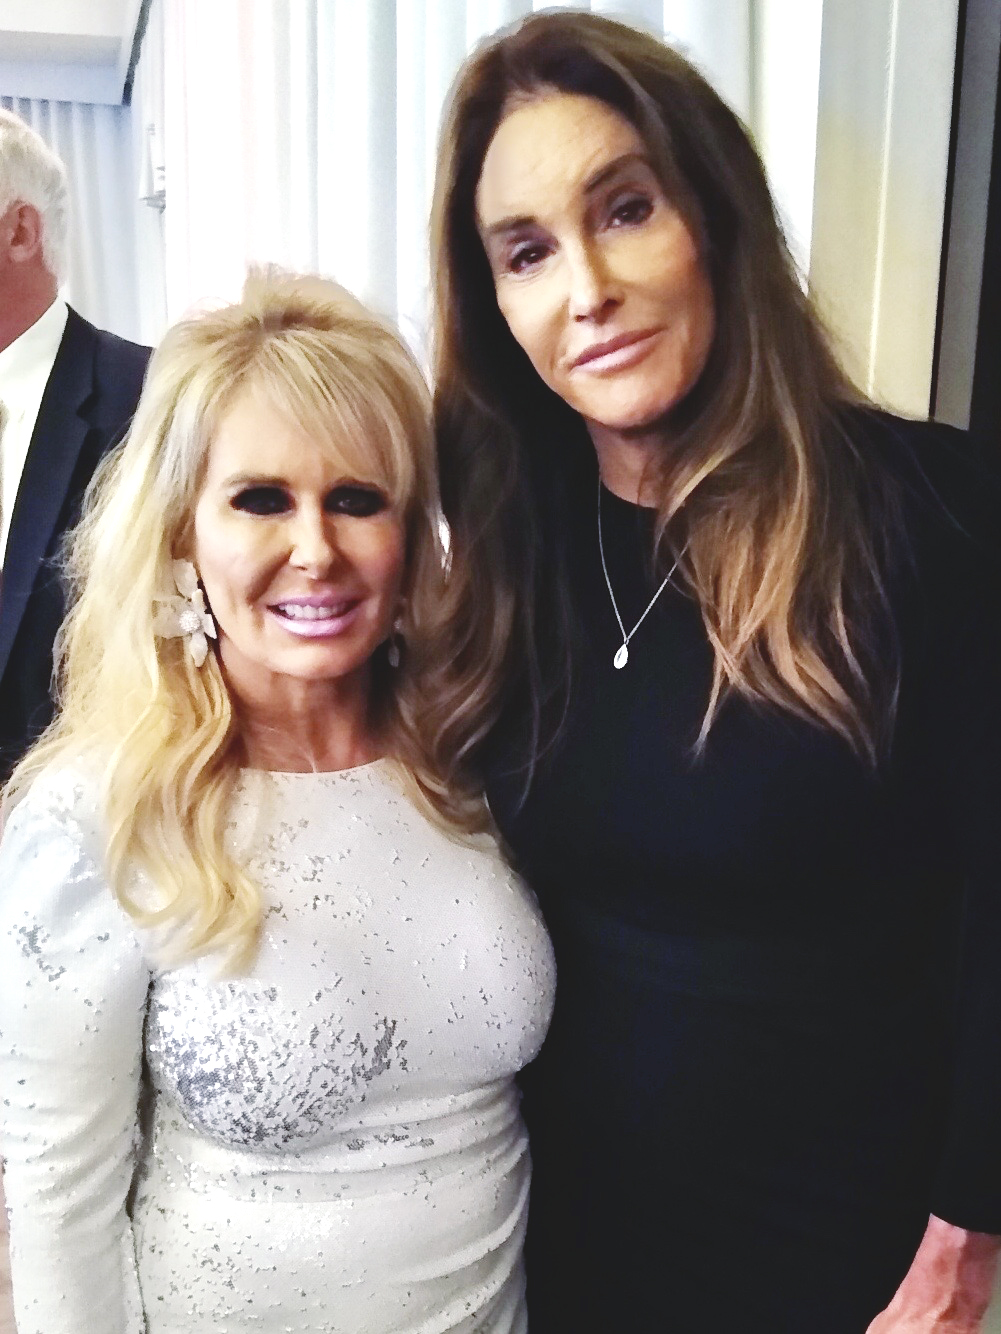 Beverly Adams and Kaitlyn Jenner